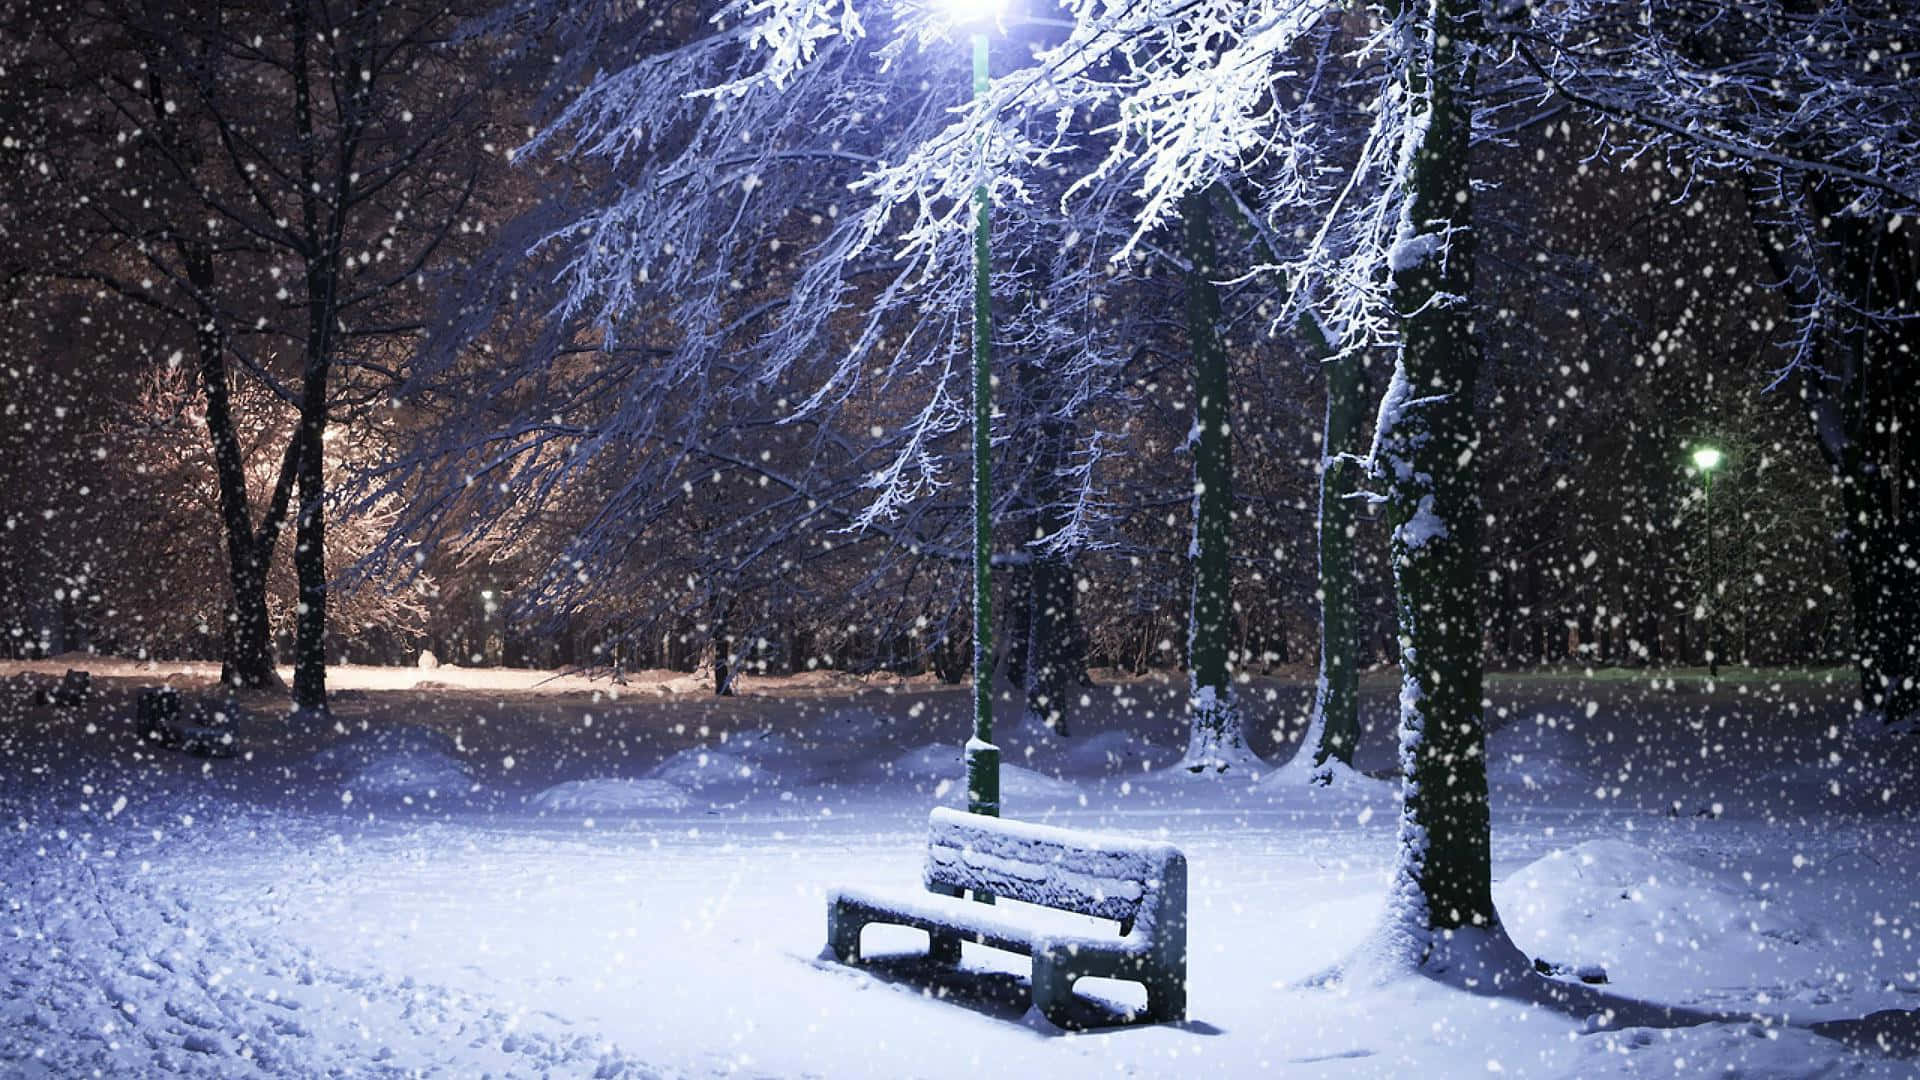 Hd Winter Background Snow Covered Park Bench With Light Post Background